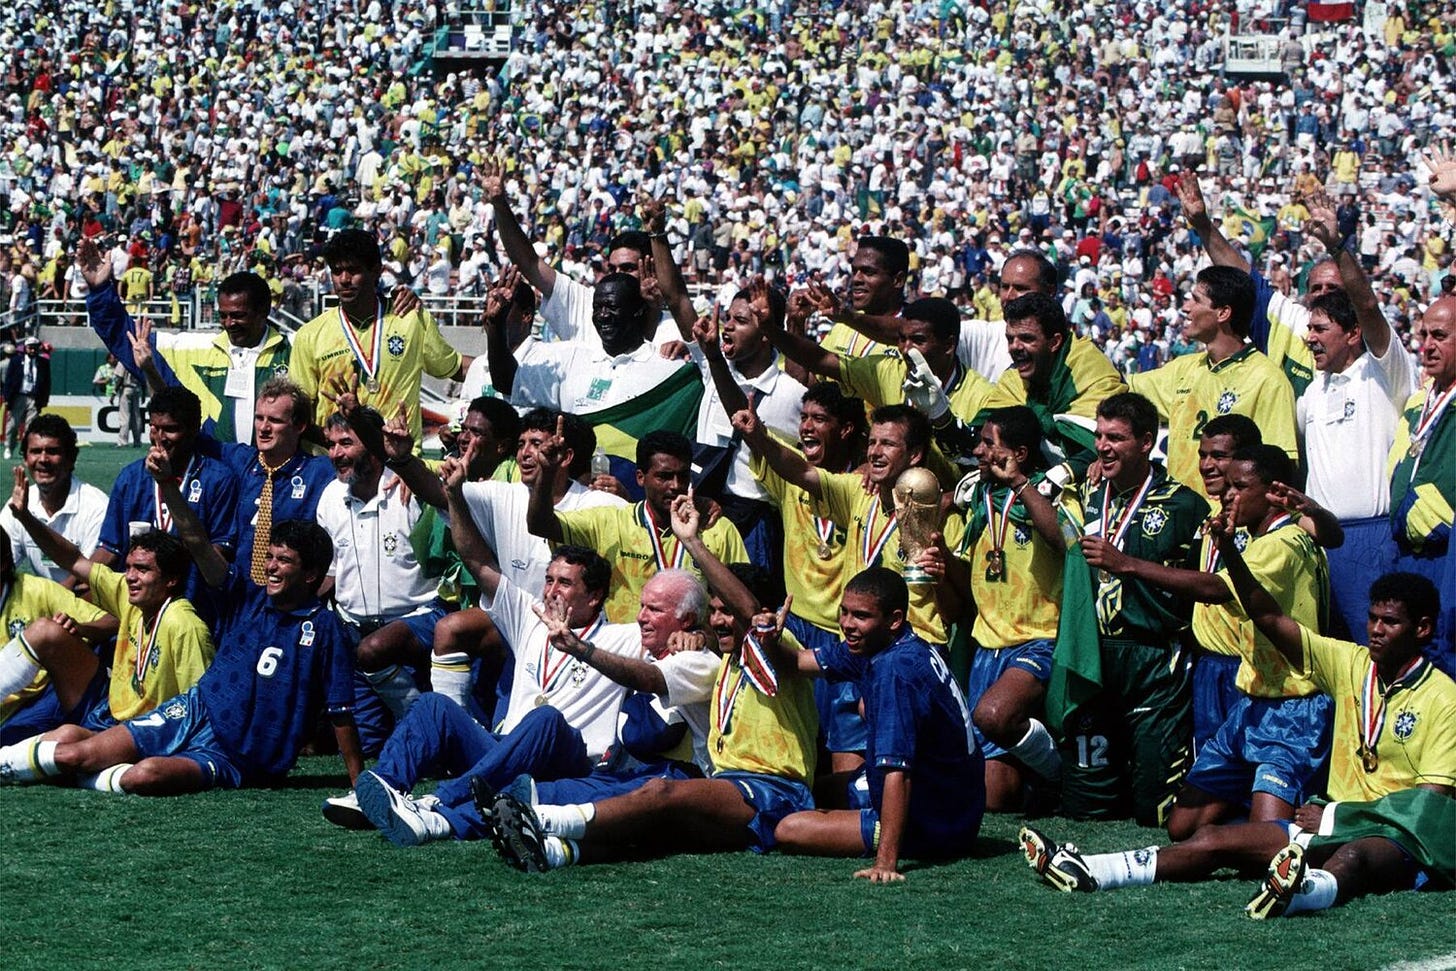 11 of Brazil’s victorious 22-man World Cup squad in 1994 were home-based players